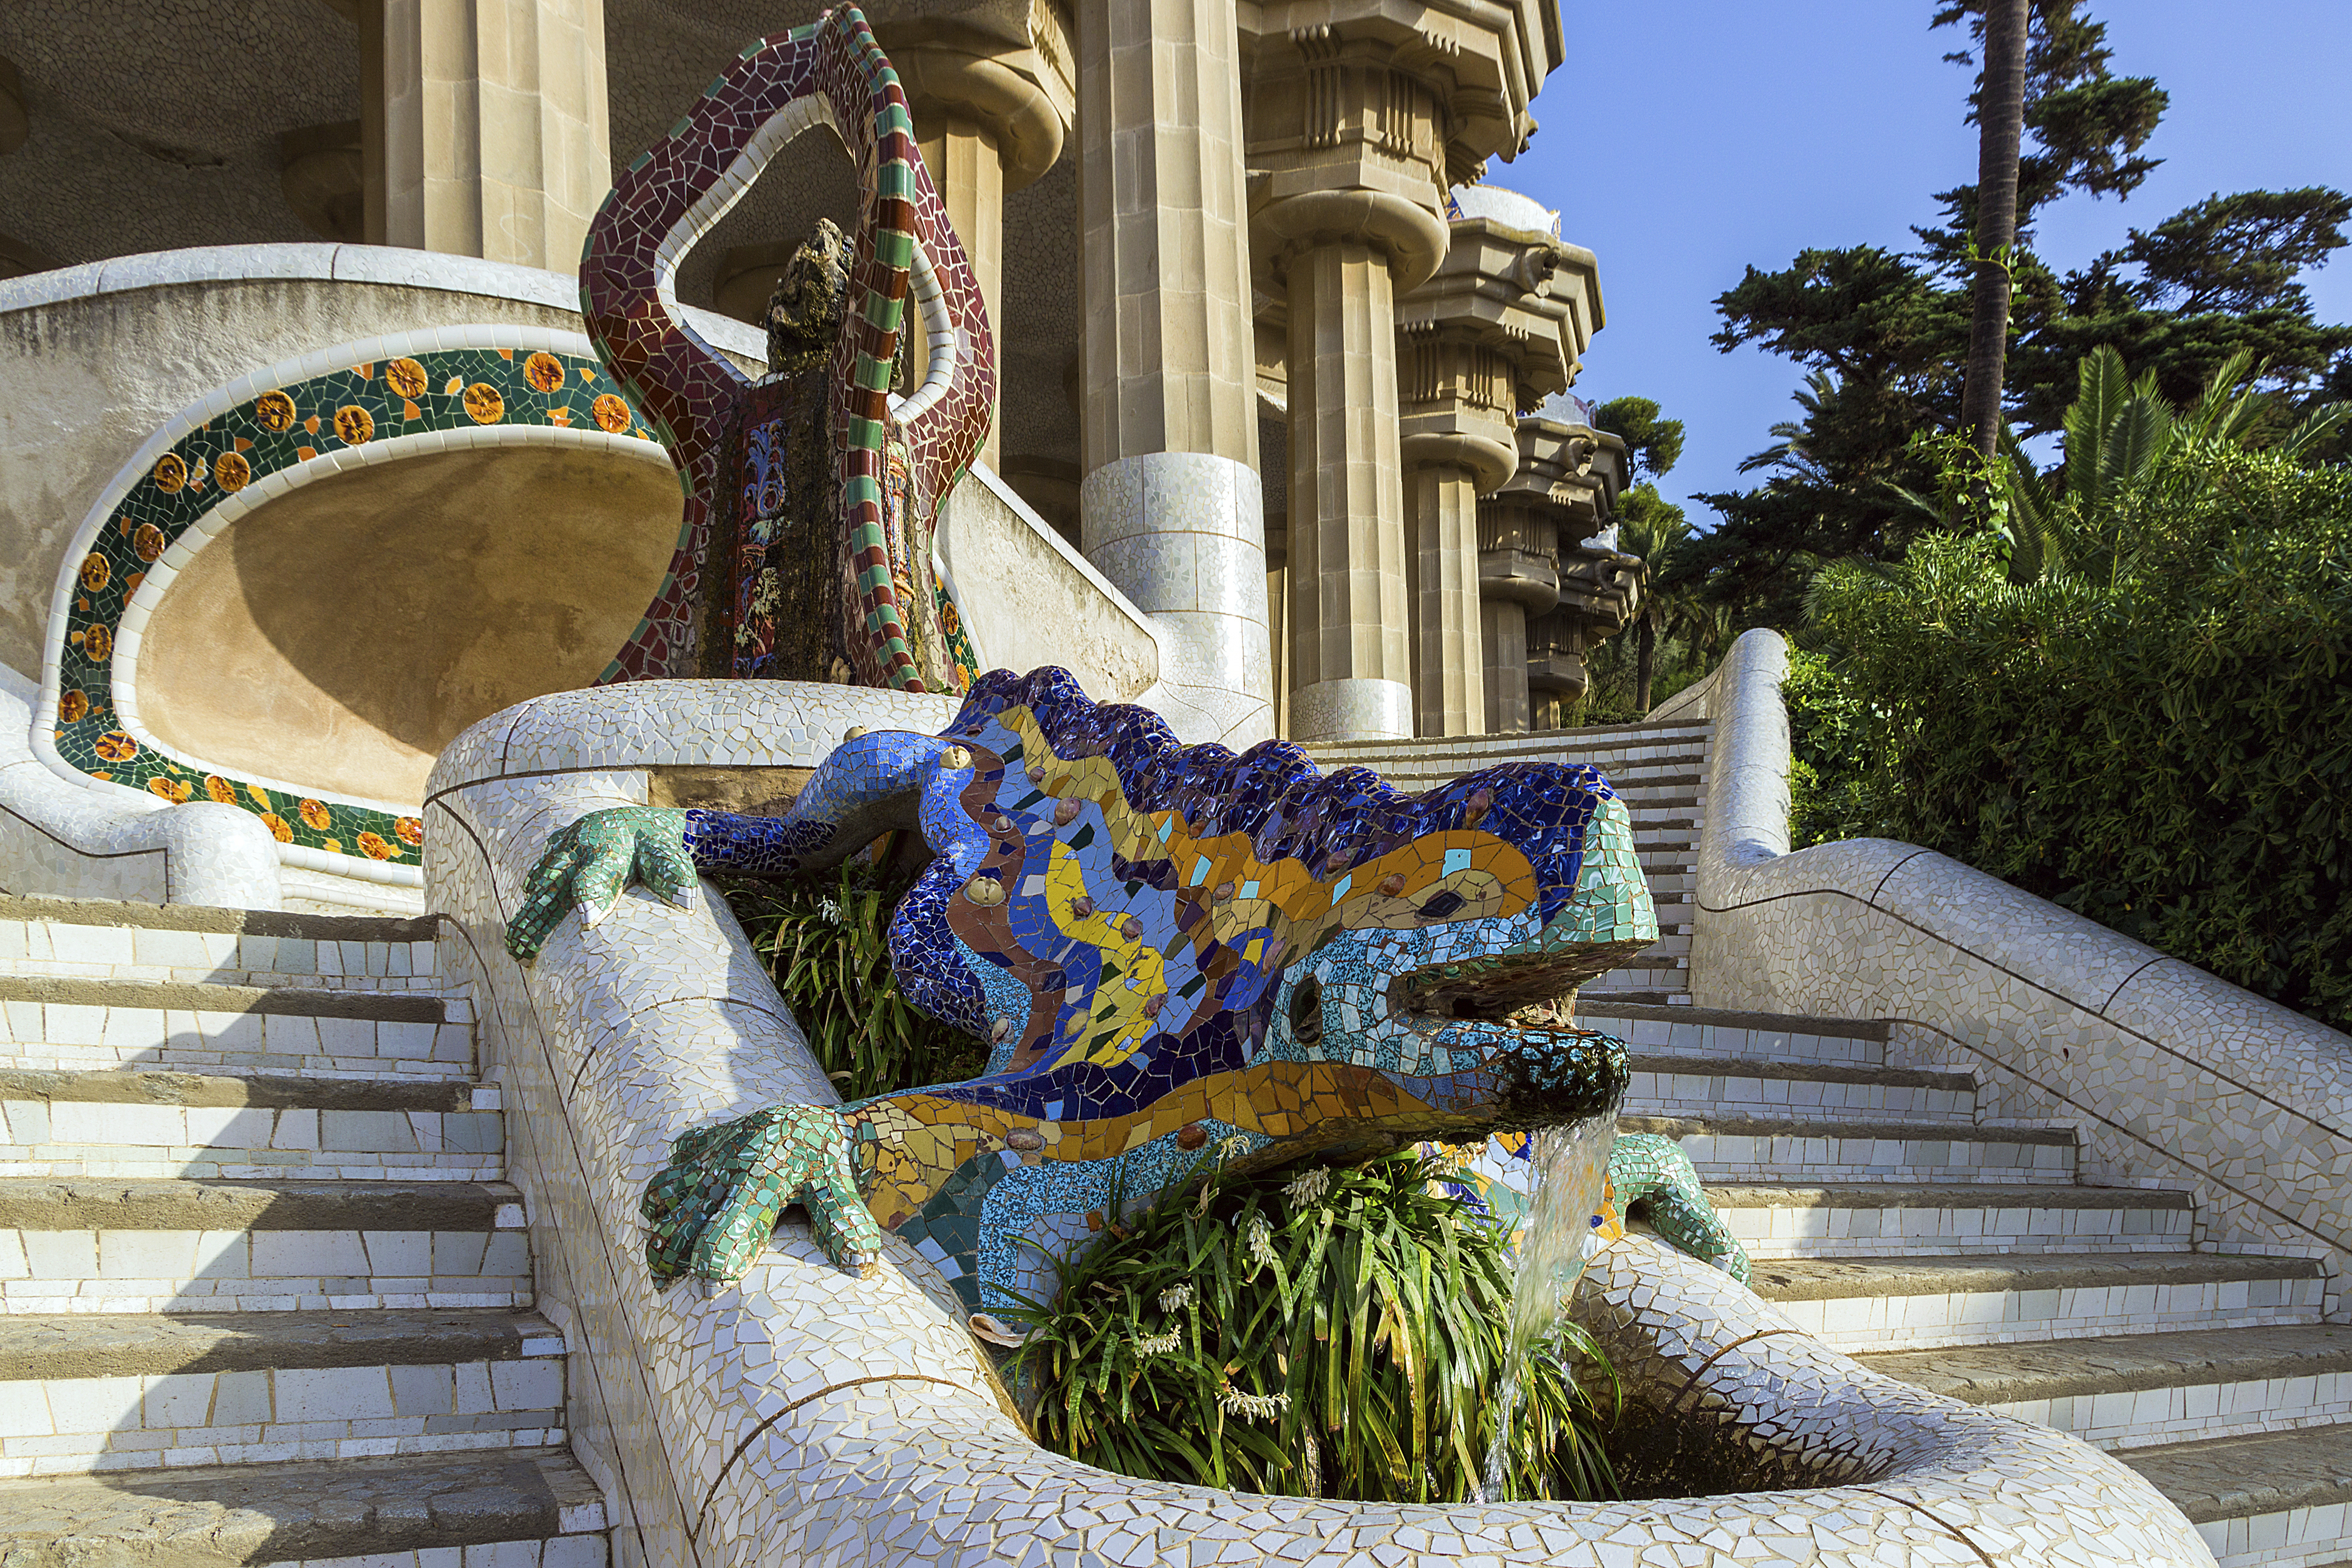 Park Güell | Barcelona, Spain Attractions - Lonely Planet3873 x 2582